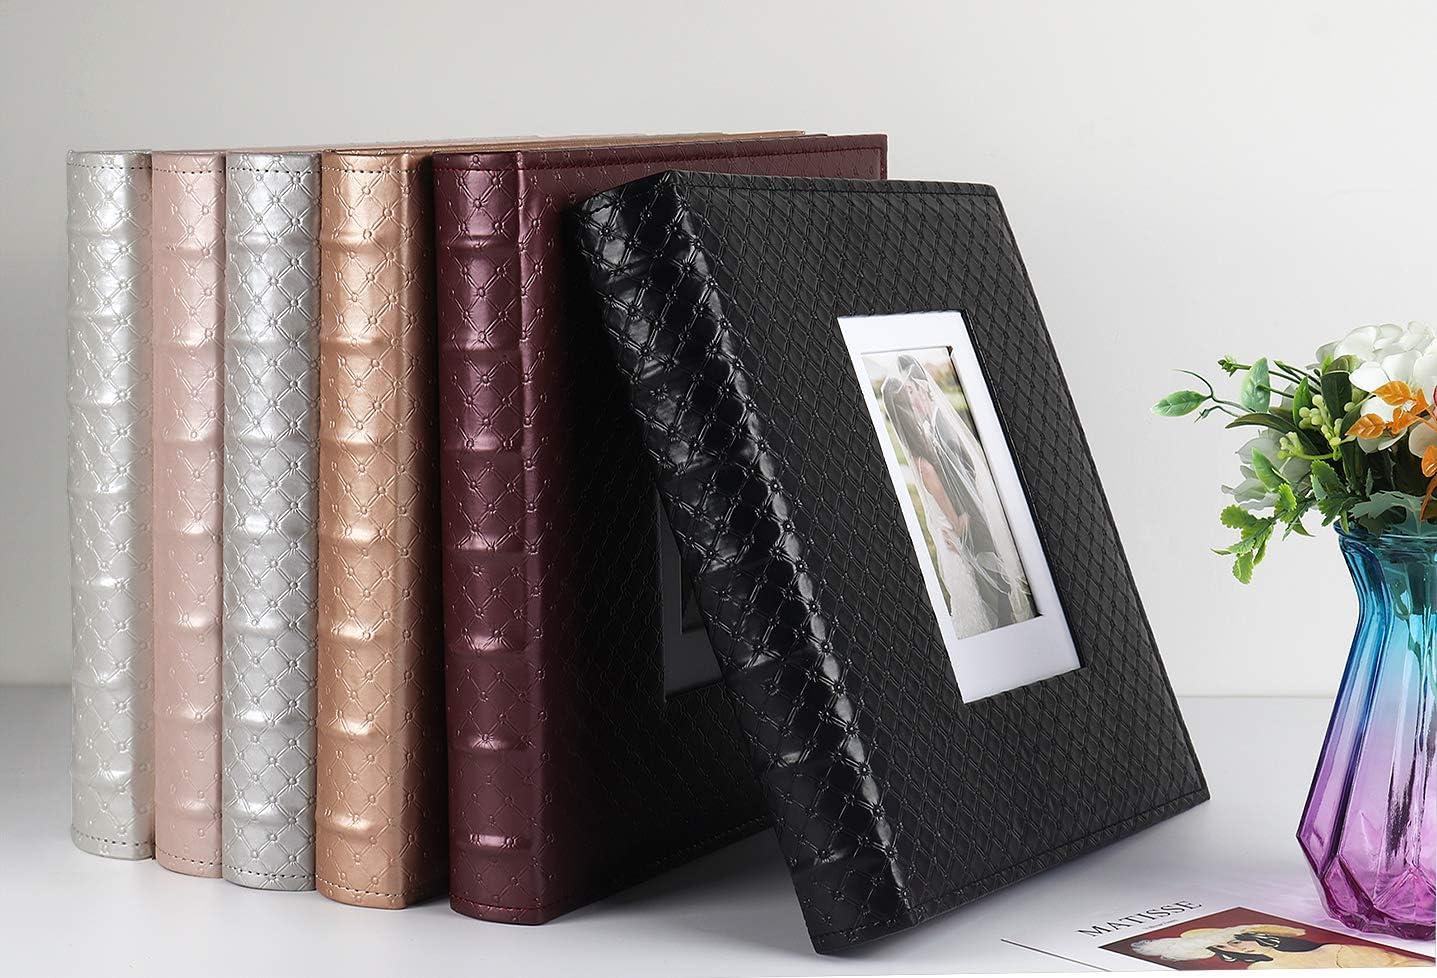  RECUTMS Photo Album 4x6 600 pictures 5 Per Page Rose Pattern PU  Leather Cover Albums Wedding Picture Albums Holds 600 Horizontal Albums and  Vertical Photos (Black) : Home & Kitchen